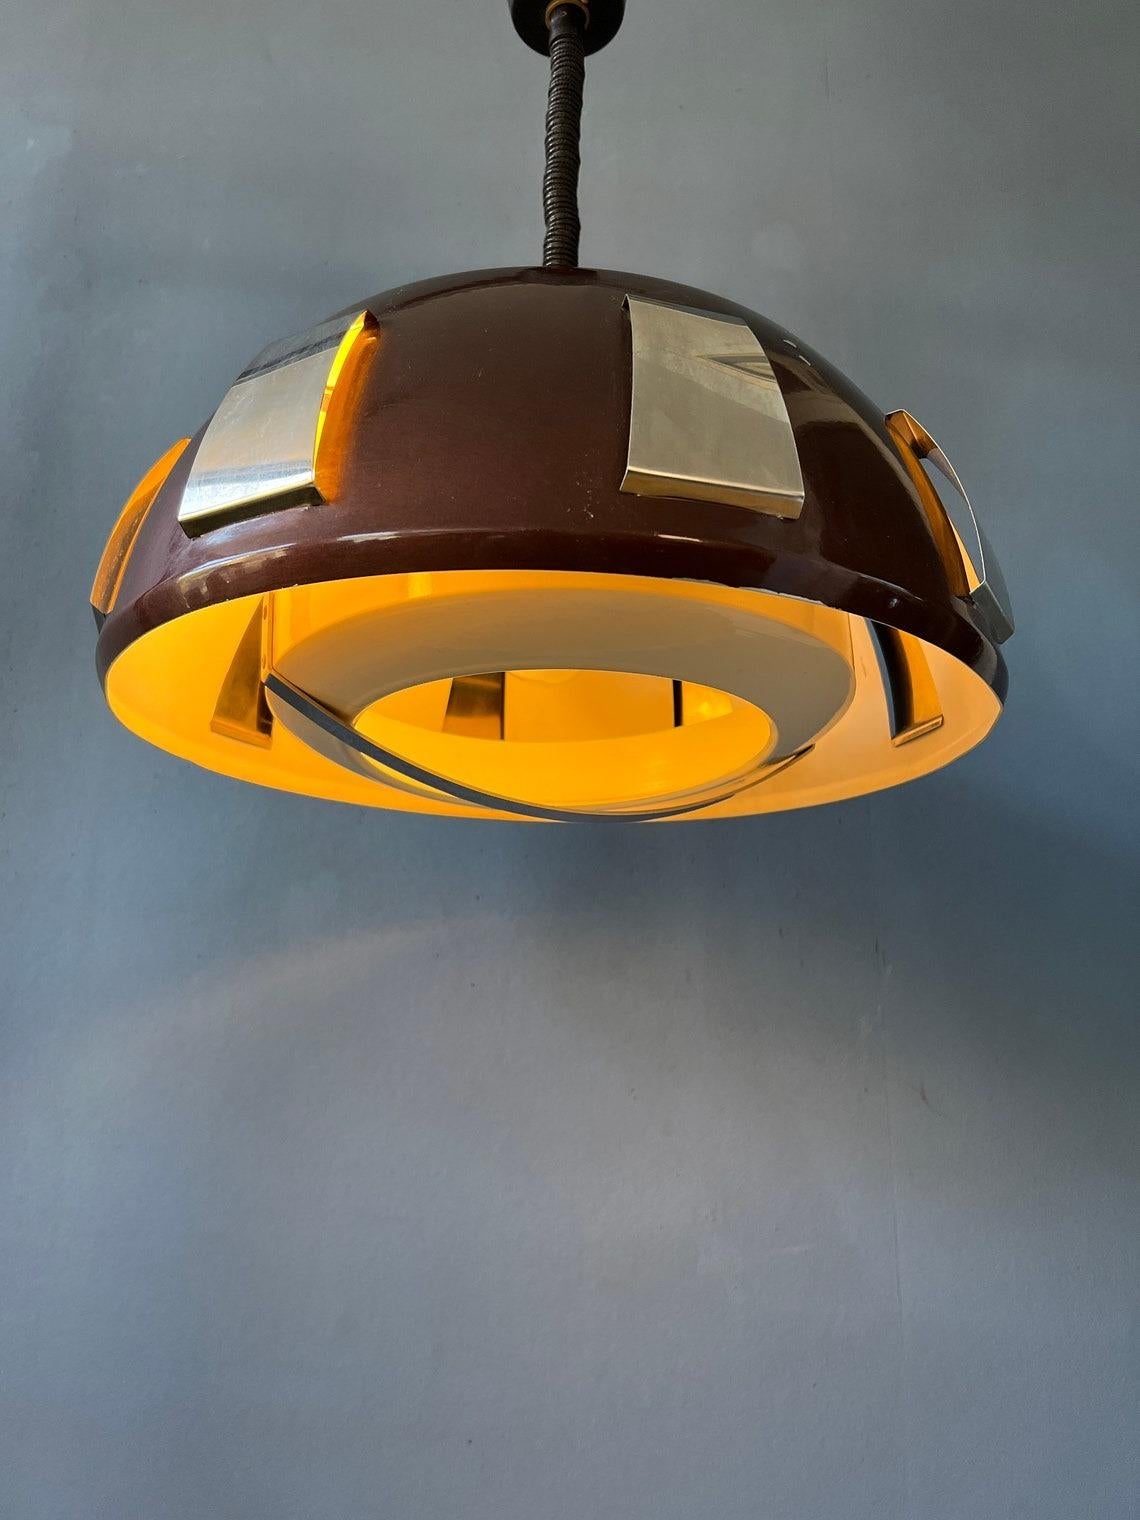 Mid century pendant light by Lakro Amstelveen. The lamp is made out of steel and has a dark brown/sparkle lacquer. The height of the lamp can easily be adjusted with the rise-and-fall mechanism. The lamp requires one E27/26 (standard) lightbulb.